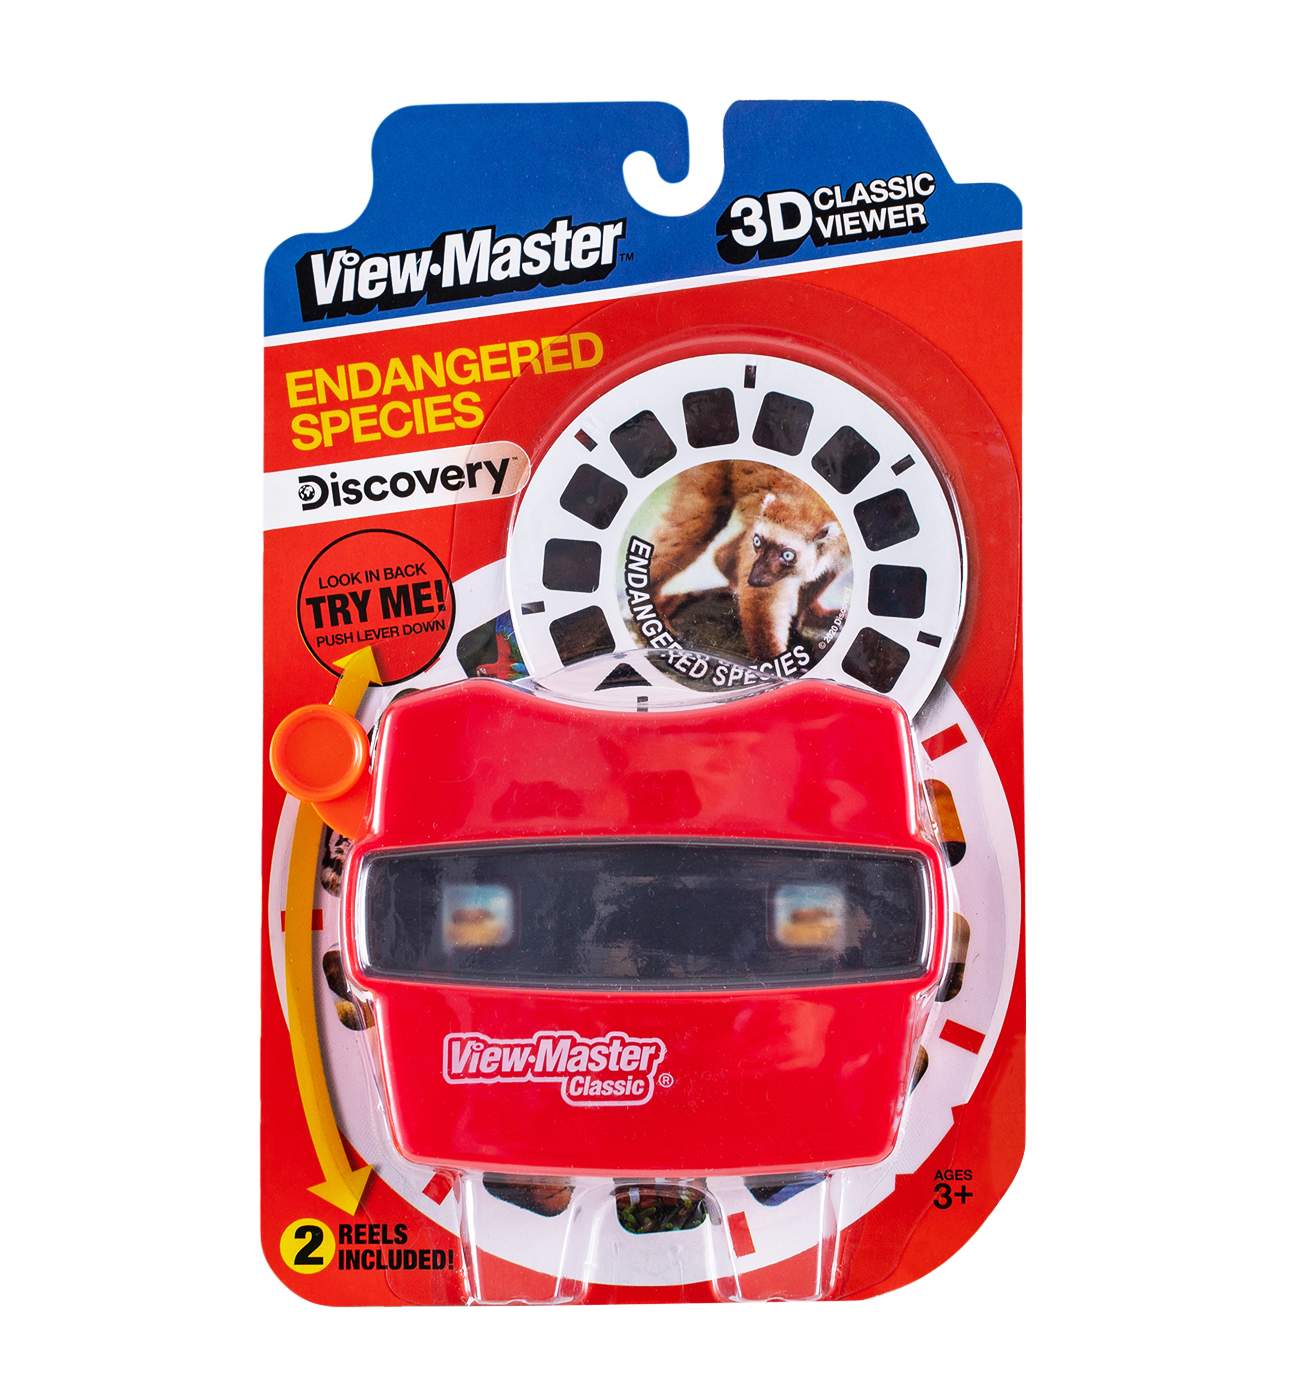 Viewmaster 3D Viewer